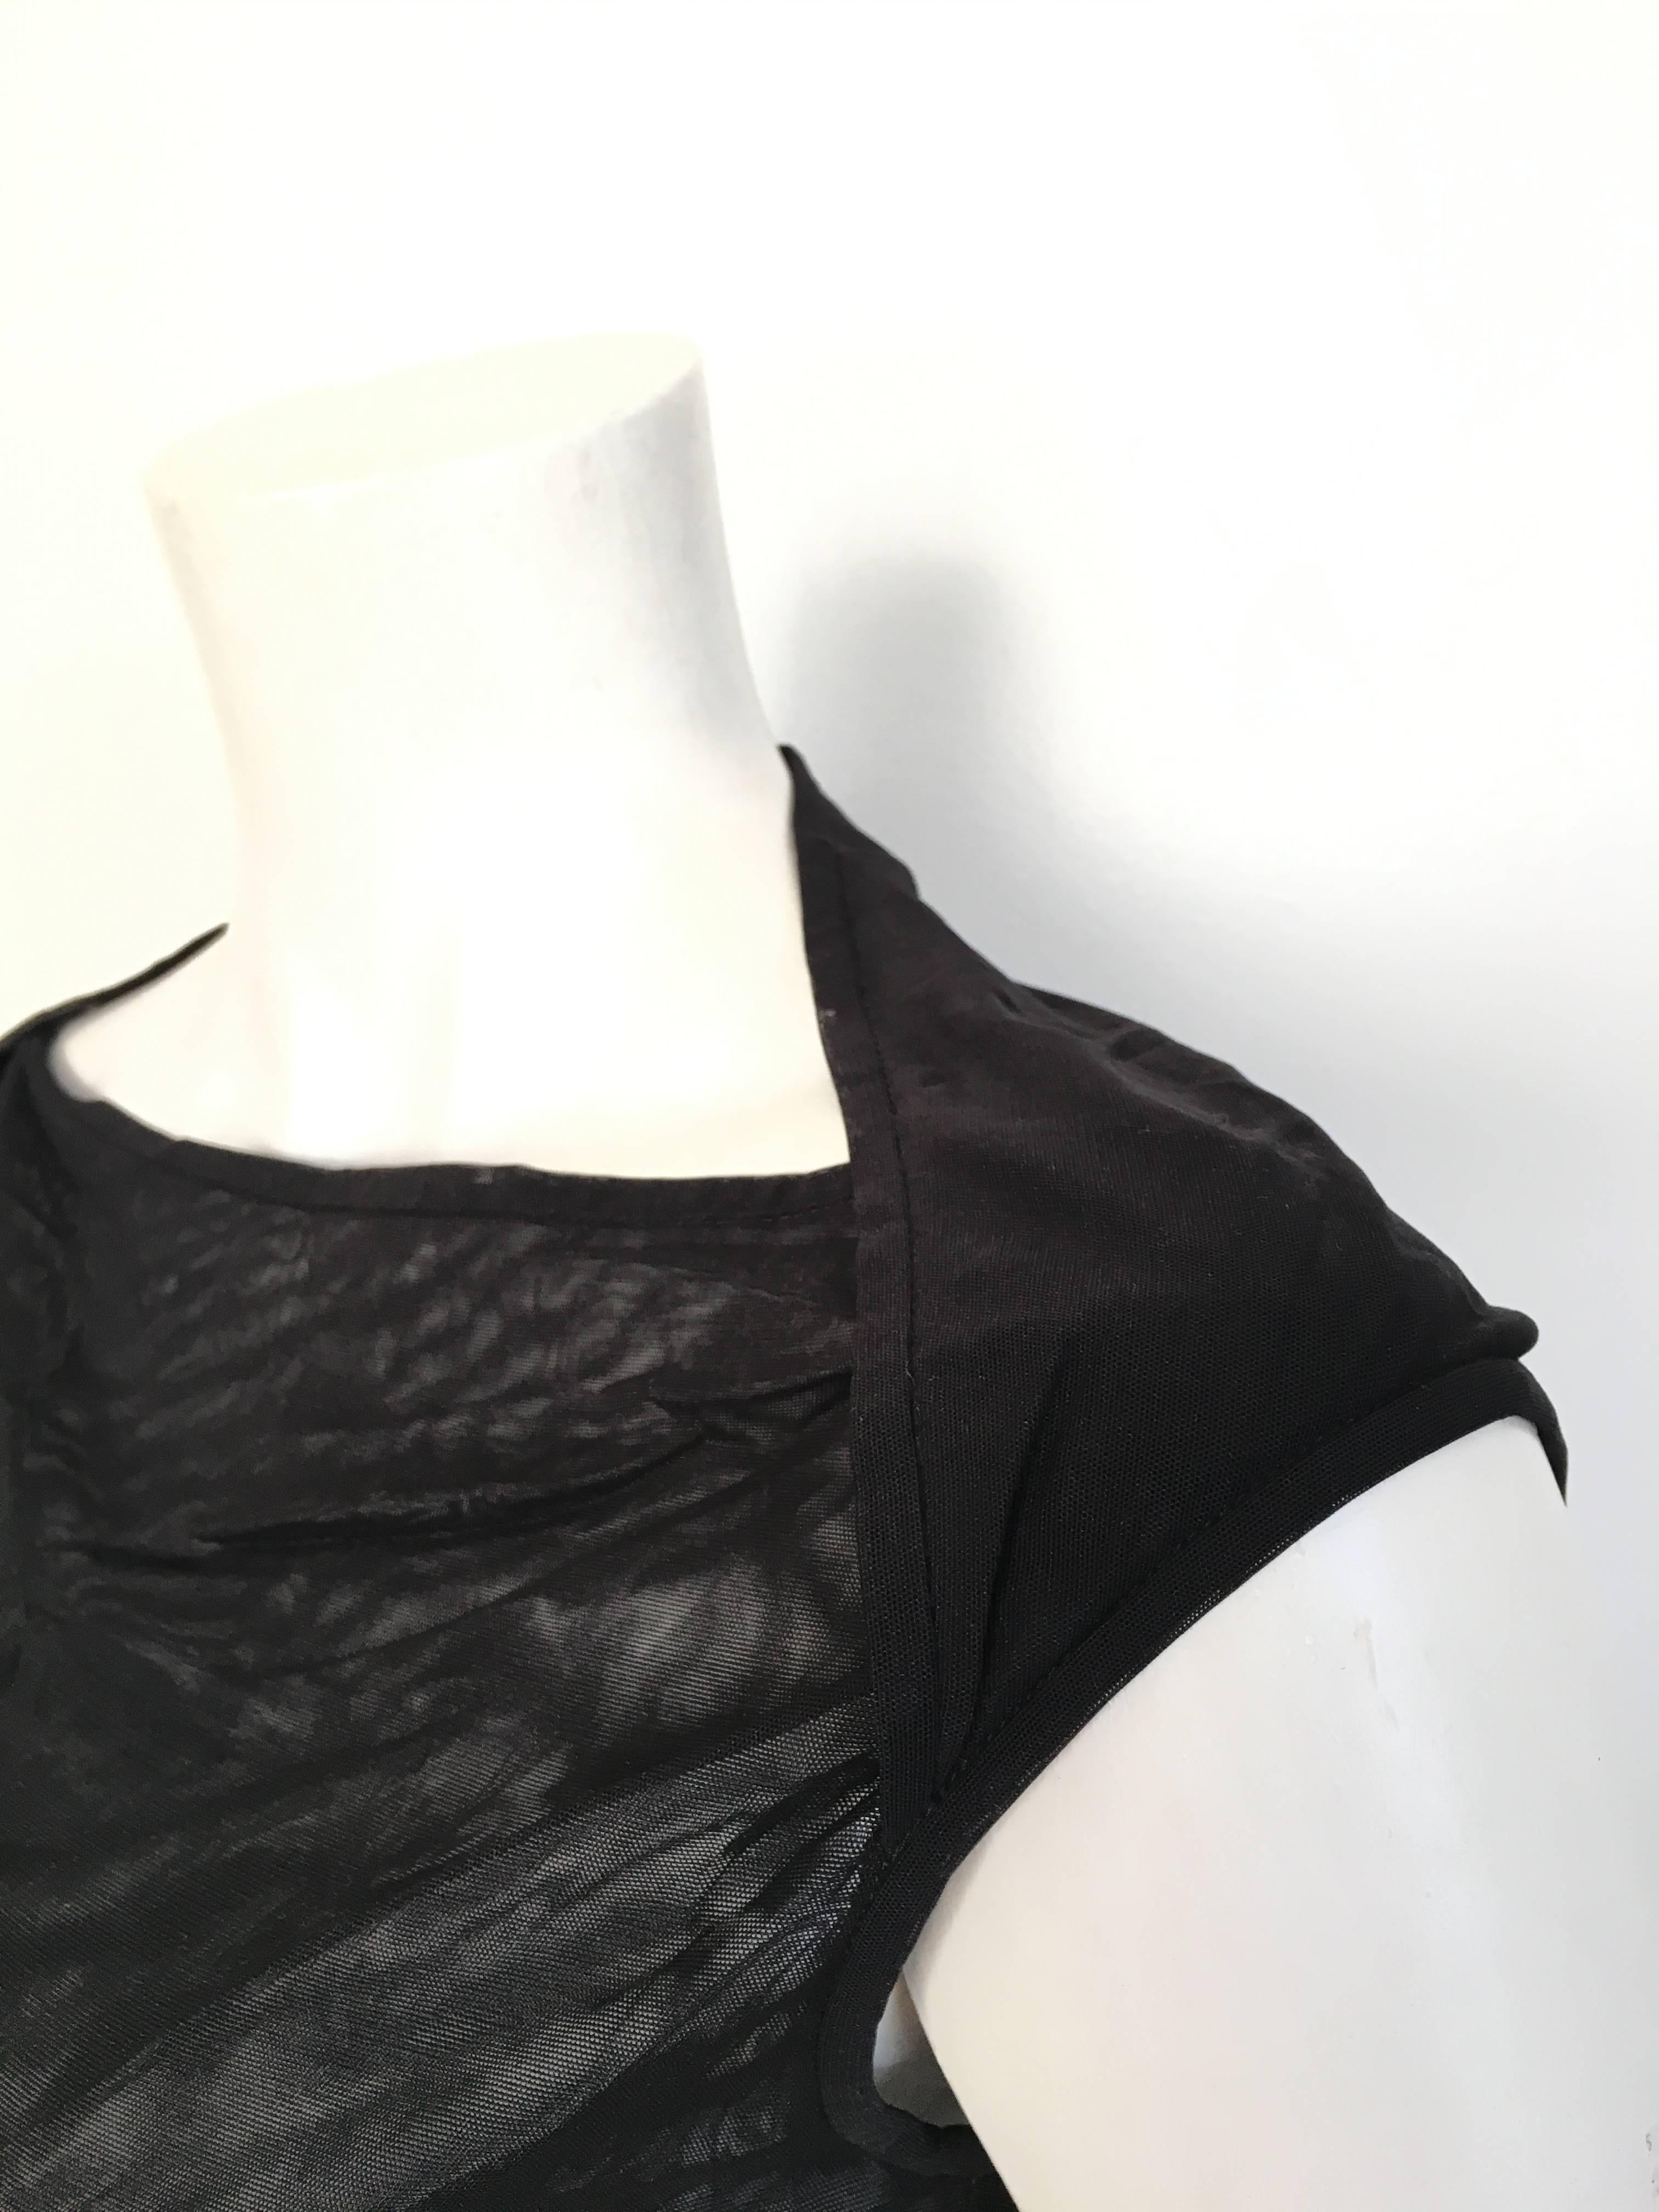 Narciso Rodriguez Black Sheer Sleeveless Sequin Top Size 6. Made in Italy. For Sale 4